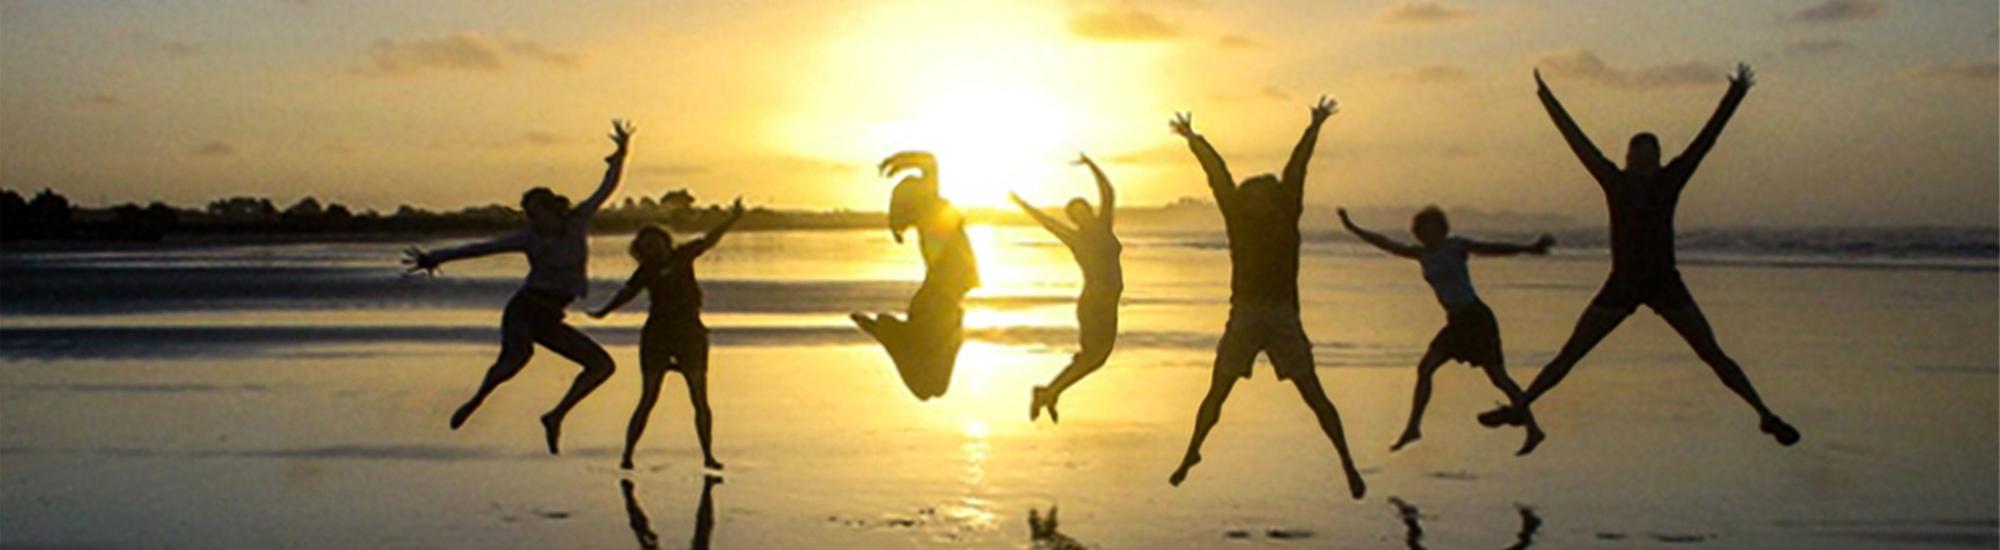 Seven people on beach at sunrise jumping into the air.